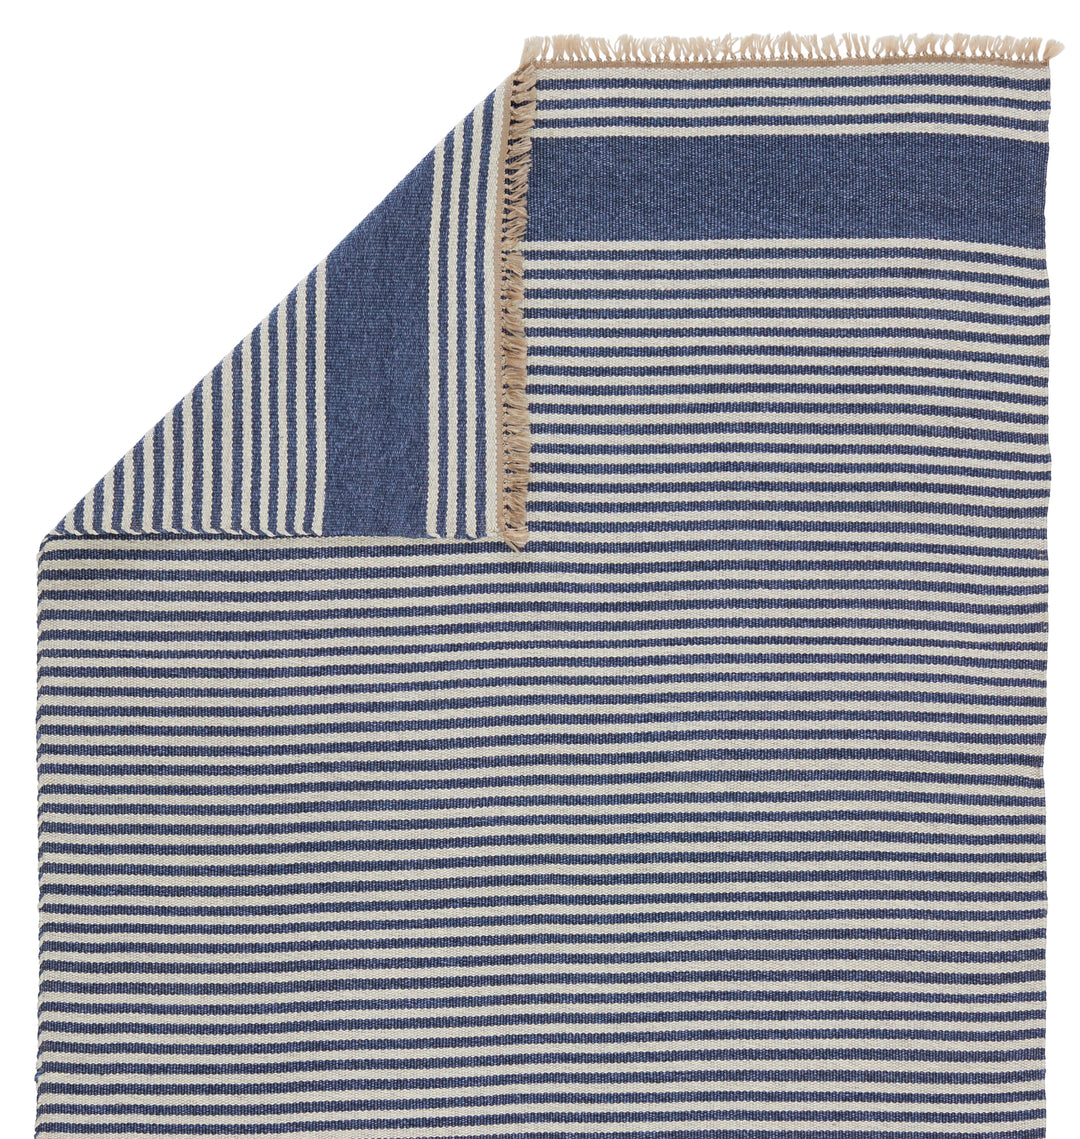 Vibe by Jaipur Living Strand Indoor/ Outdoor Striped Blue/ Beige Area Rug (MORRO BAY - MRB03)